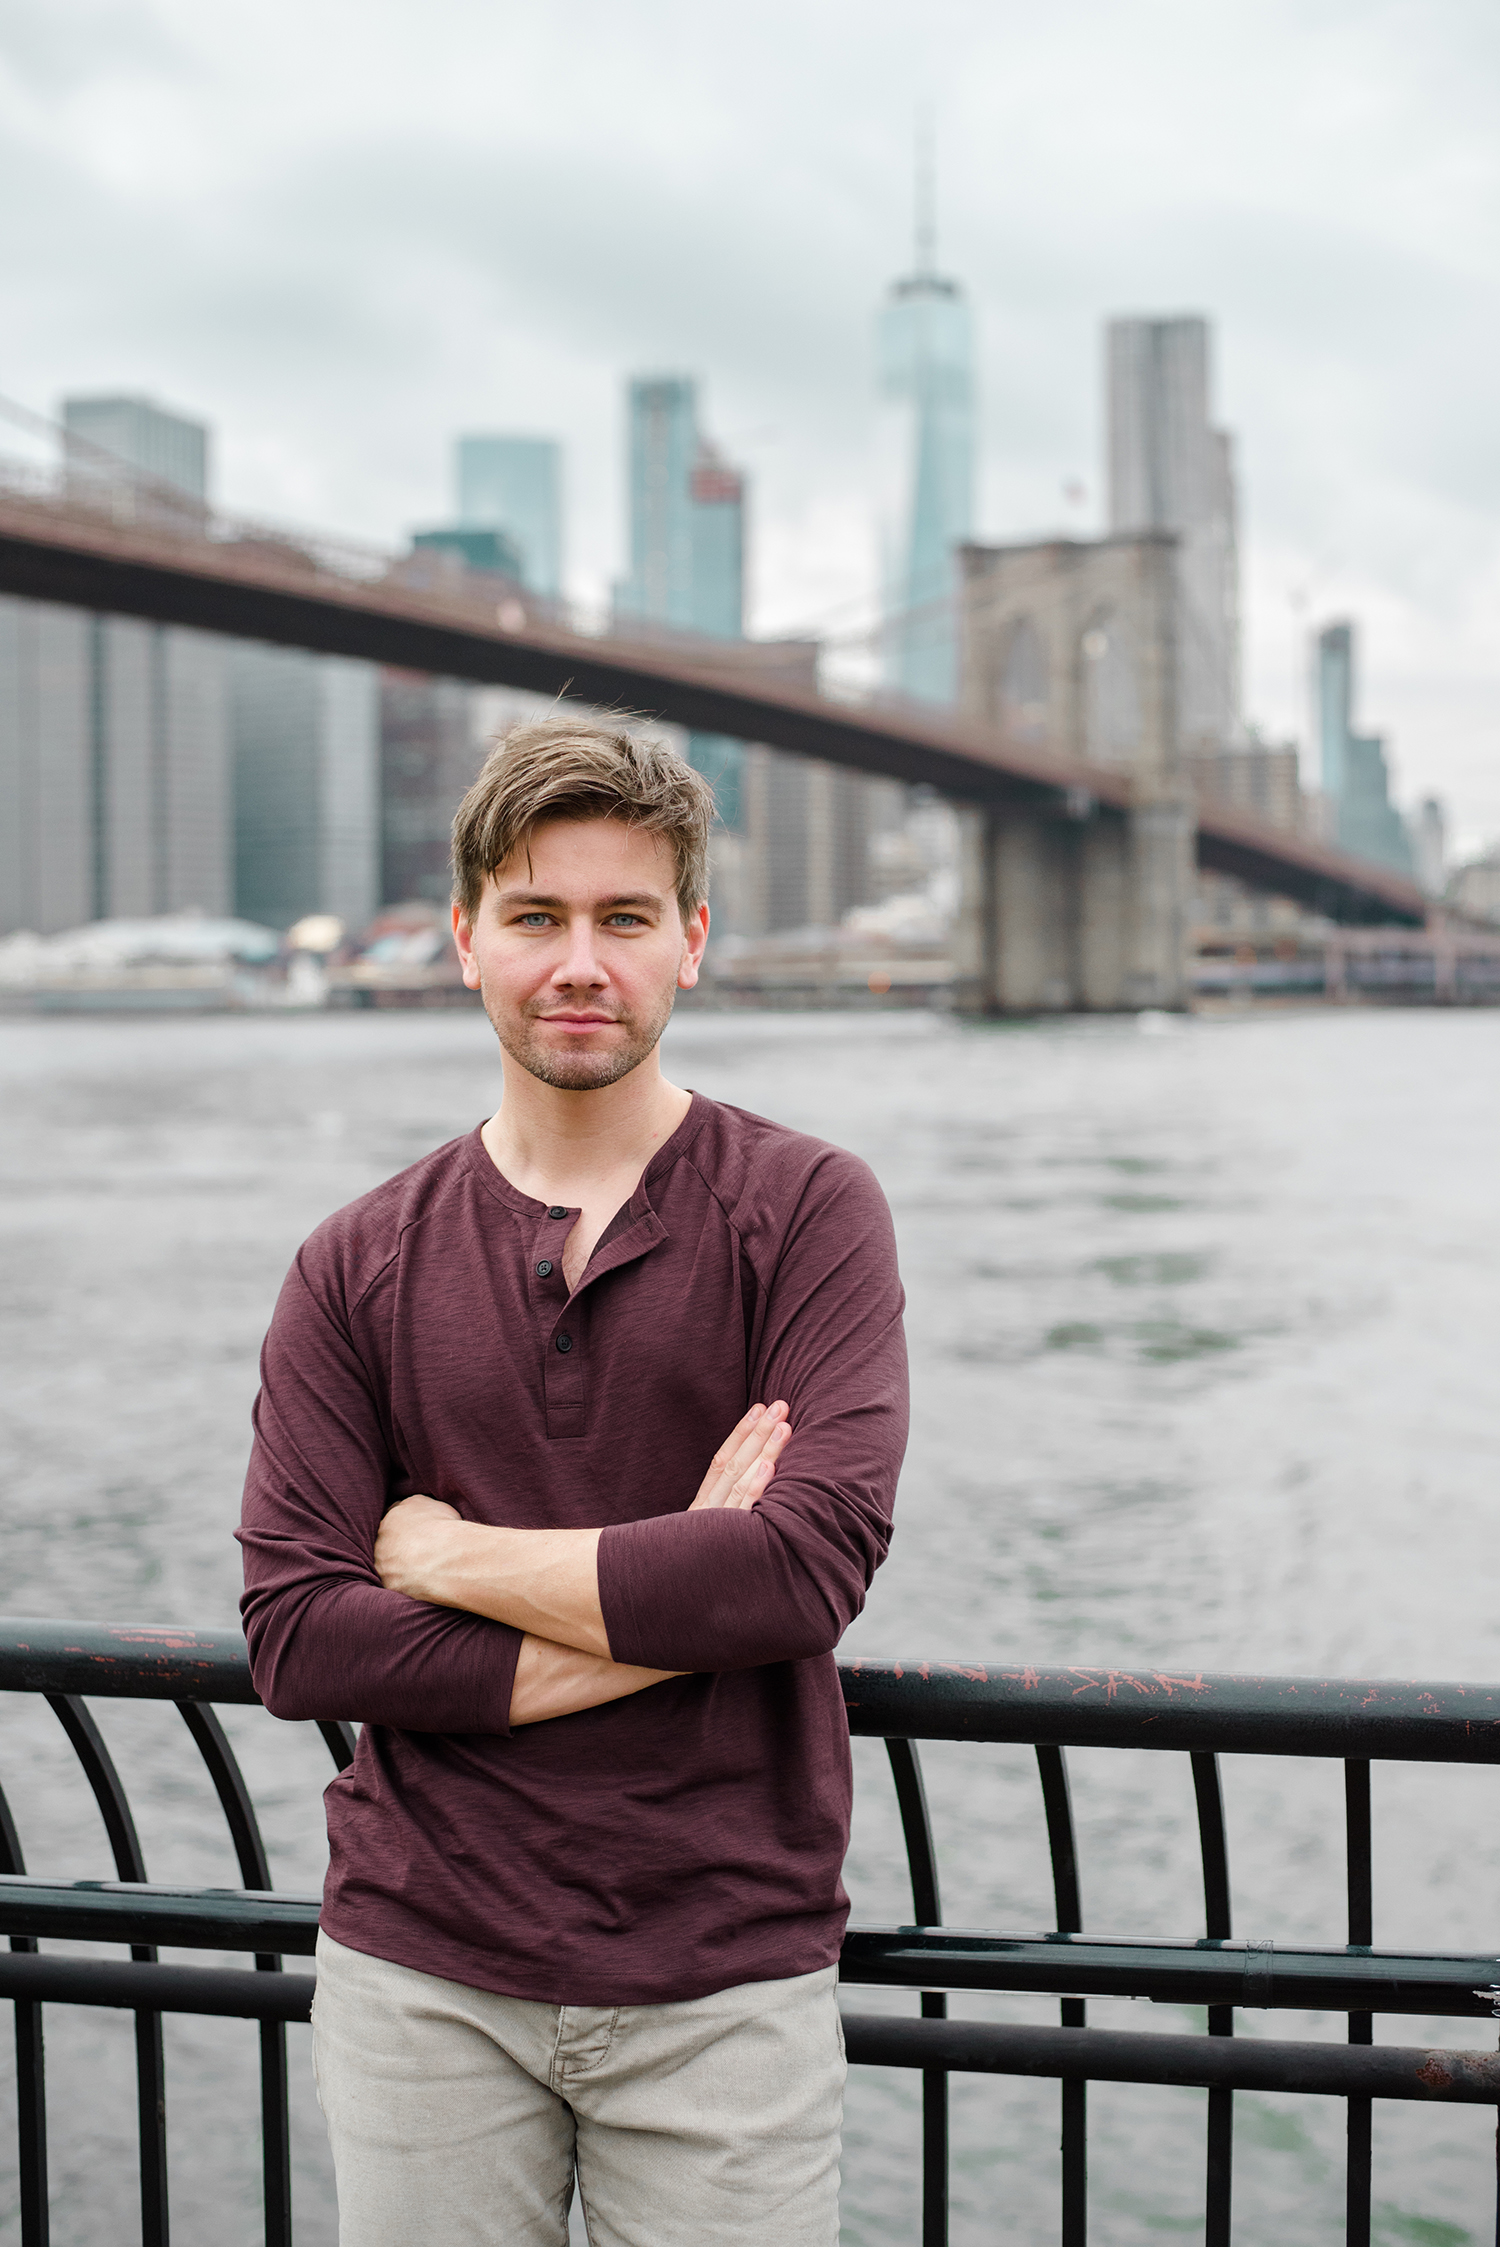 Torrance Coombs joins wife Alyssa Campanella of The A List blog for autumn in New York